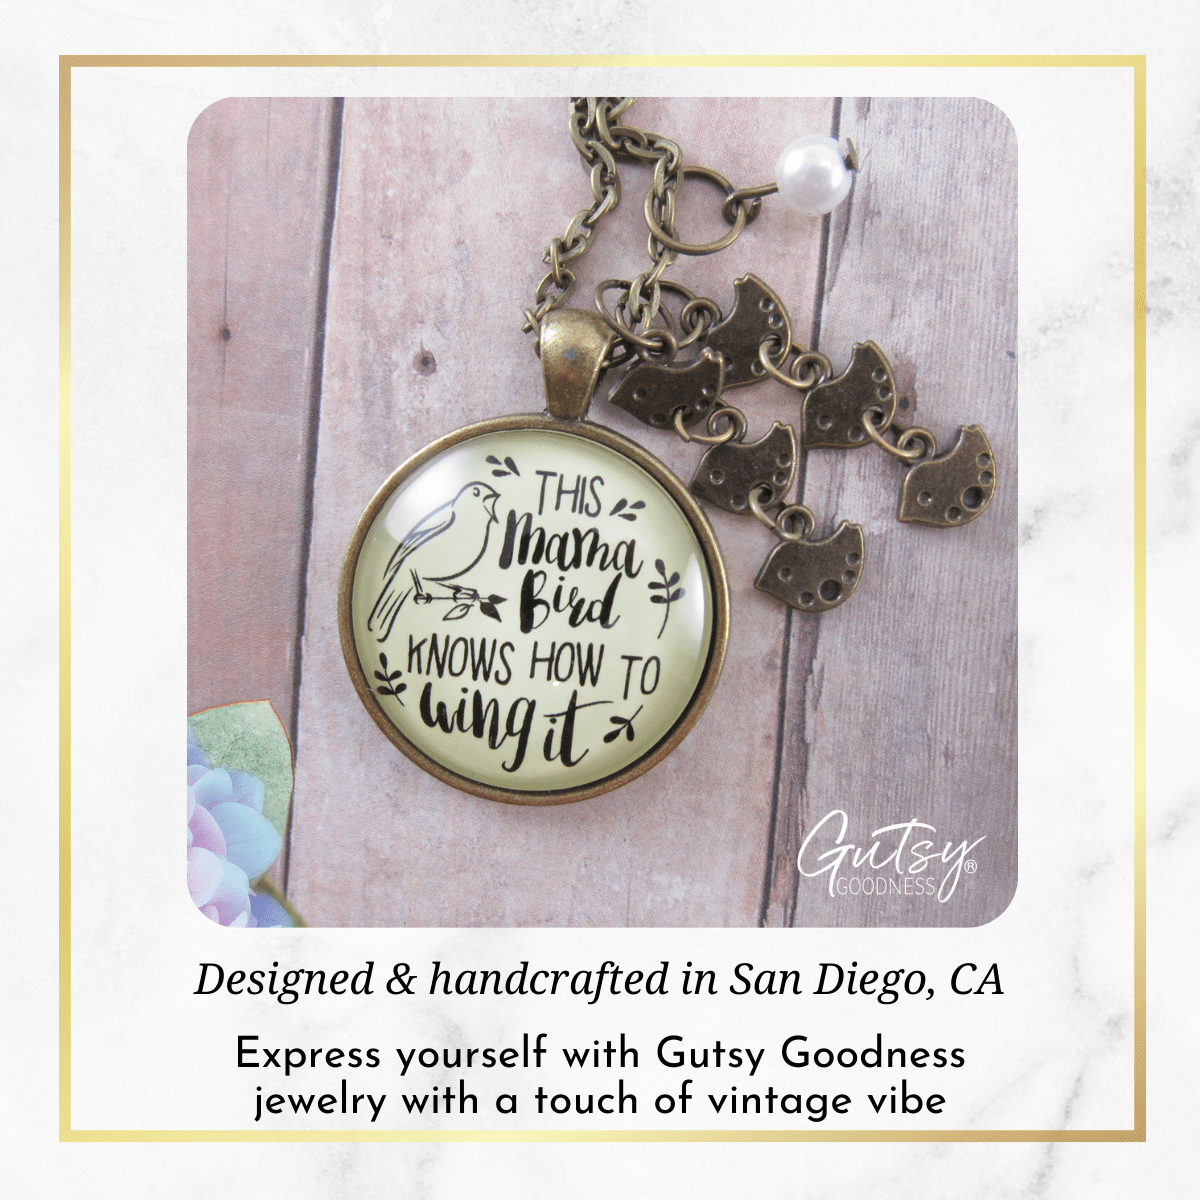 Gutsy Goodness Mama Bird Necklace 6 Kids Wings It Baby Bird Charm Gift Mom Jewelry - 24&quot; - 24&quot; - Gutsy Goodness;Mama Bird Necklace 6 Kids Wings It Baby Bird Charm Gift Mom Jewelry - 24&Quot; - 24&Quot; - 24&Quot; - Gutsy Goodness Handmade Jewelry Gifts